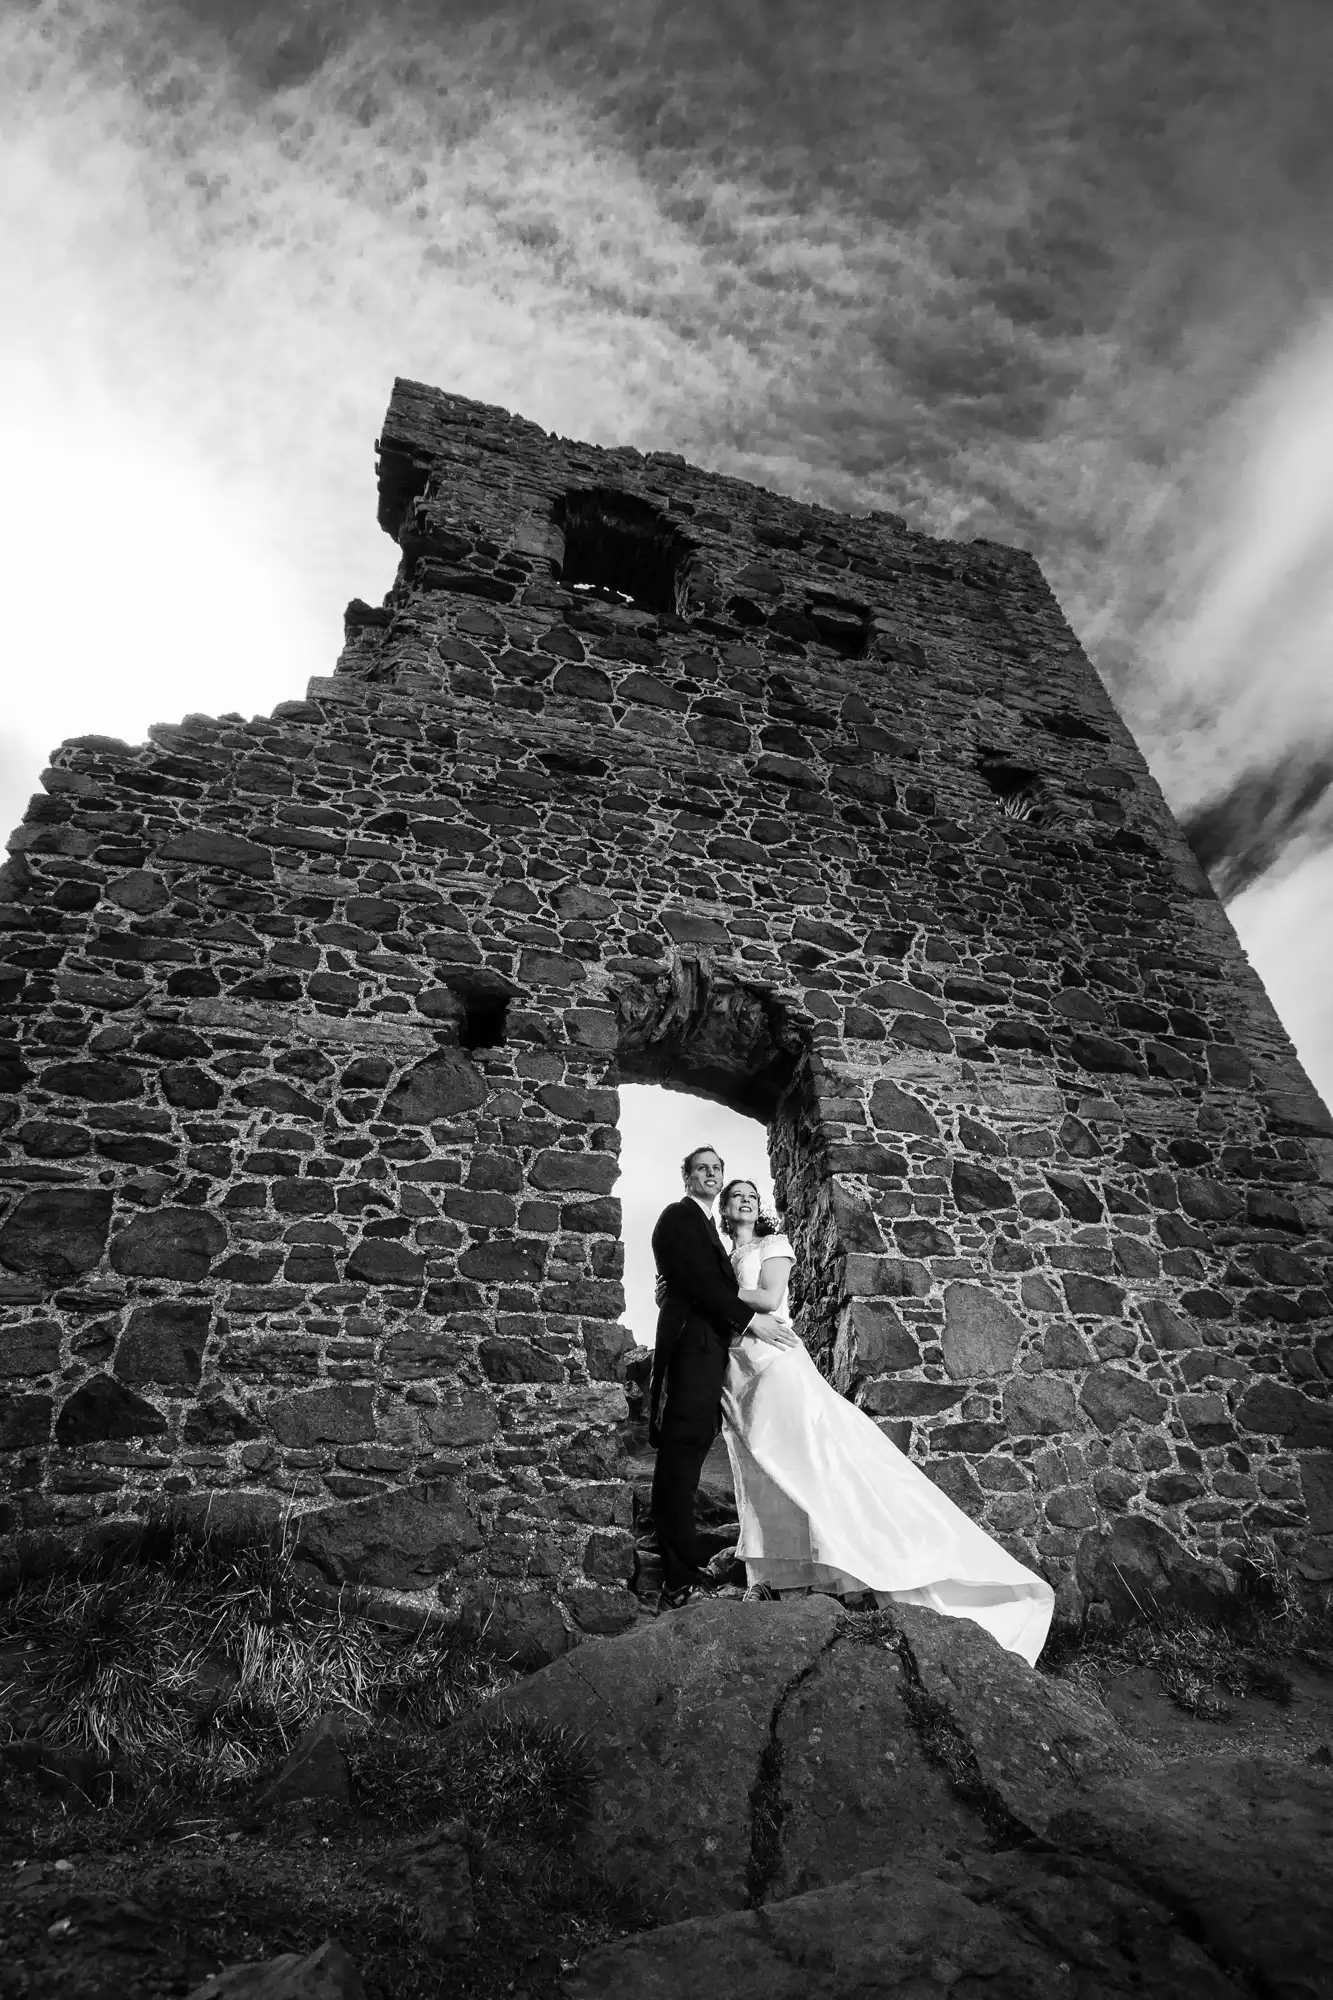 A bride and groom stand in an embrace under the archway of a ruined stone tower, with a dramatic sky overhead.